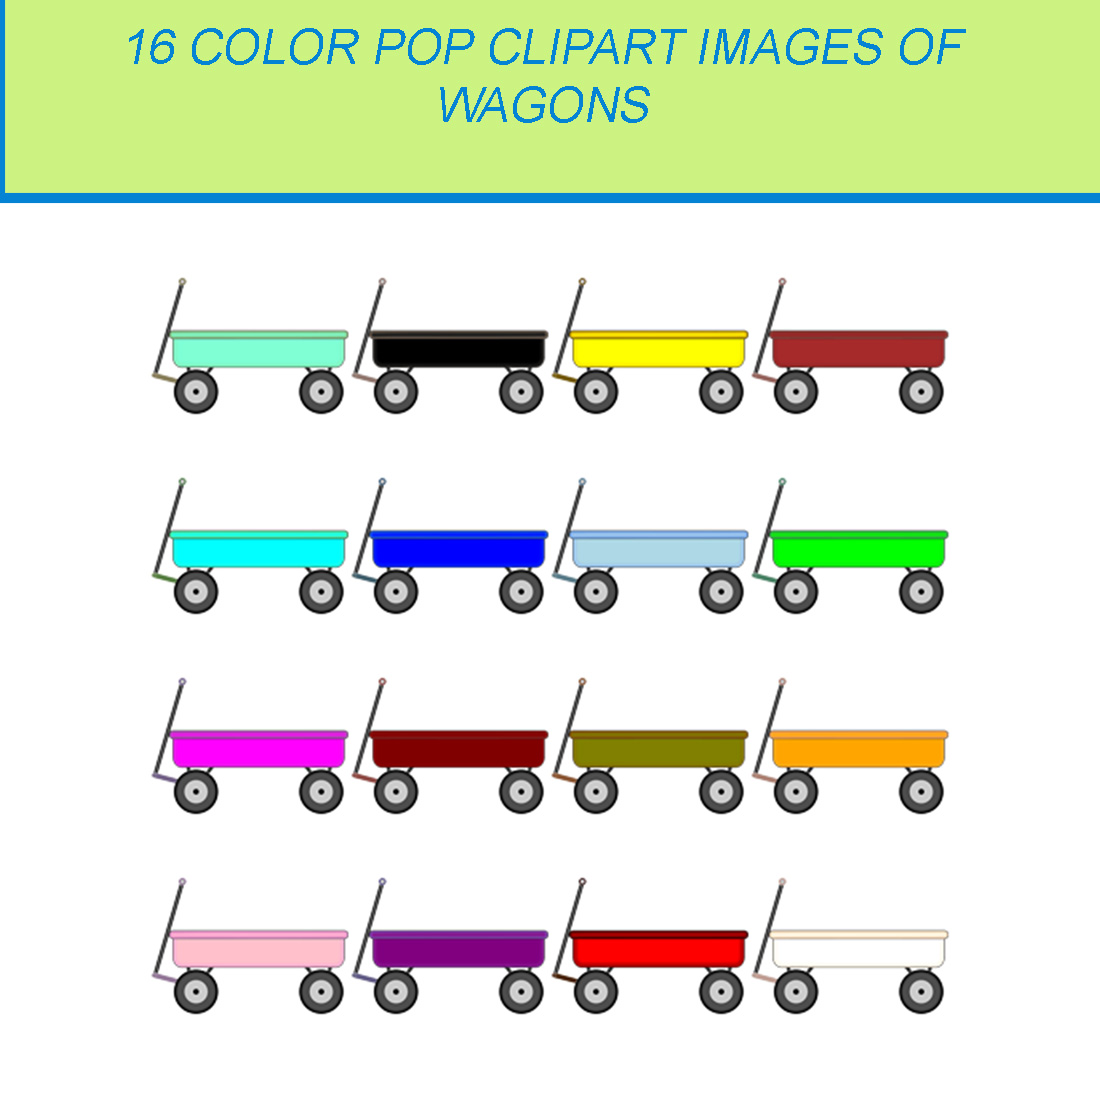 16 COLOR POP CLIPART IMAGES OF WAGONS cover image.